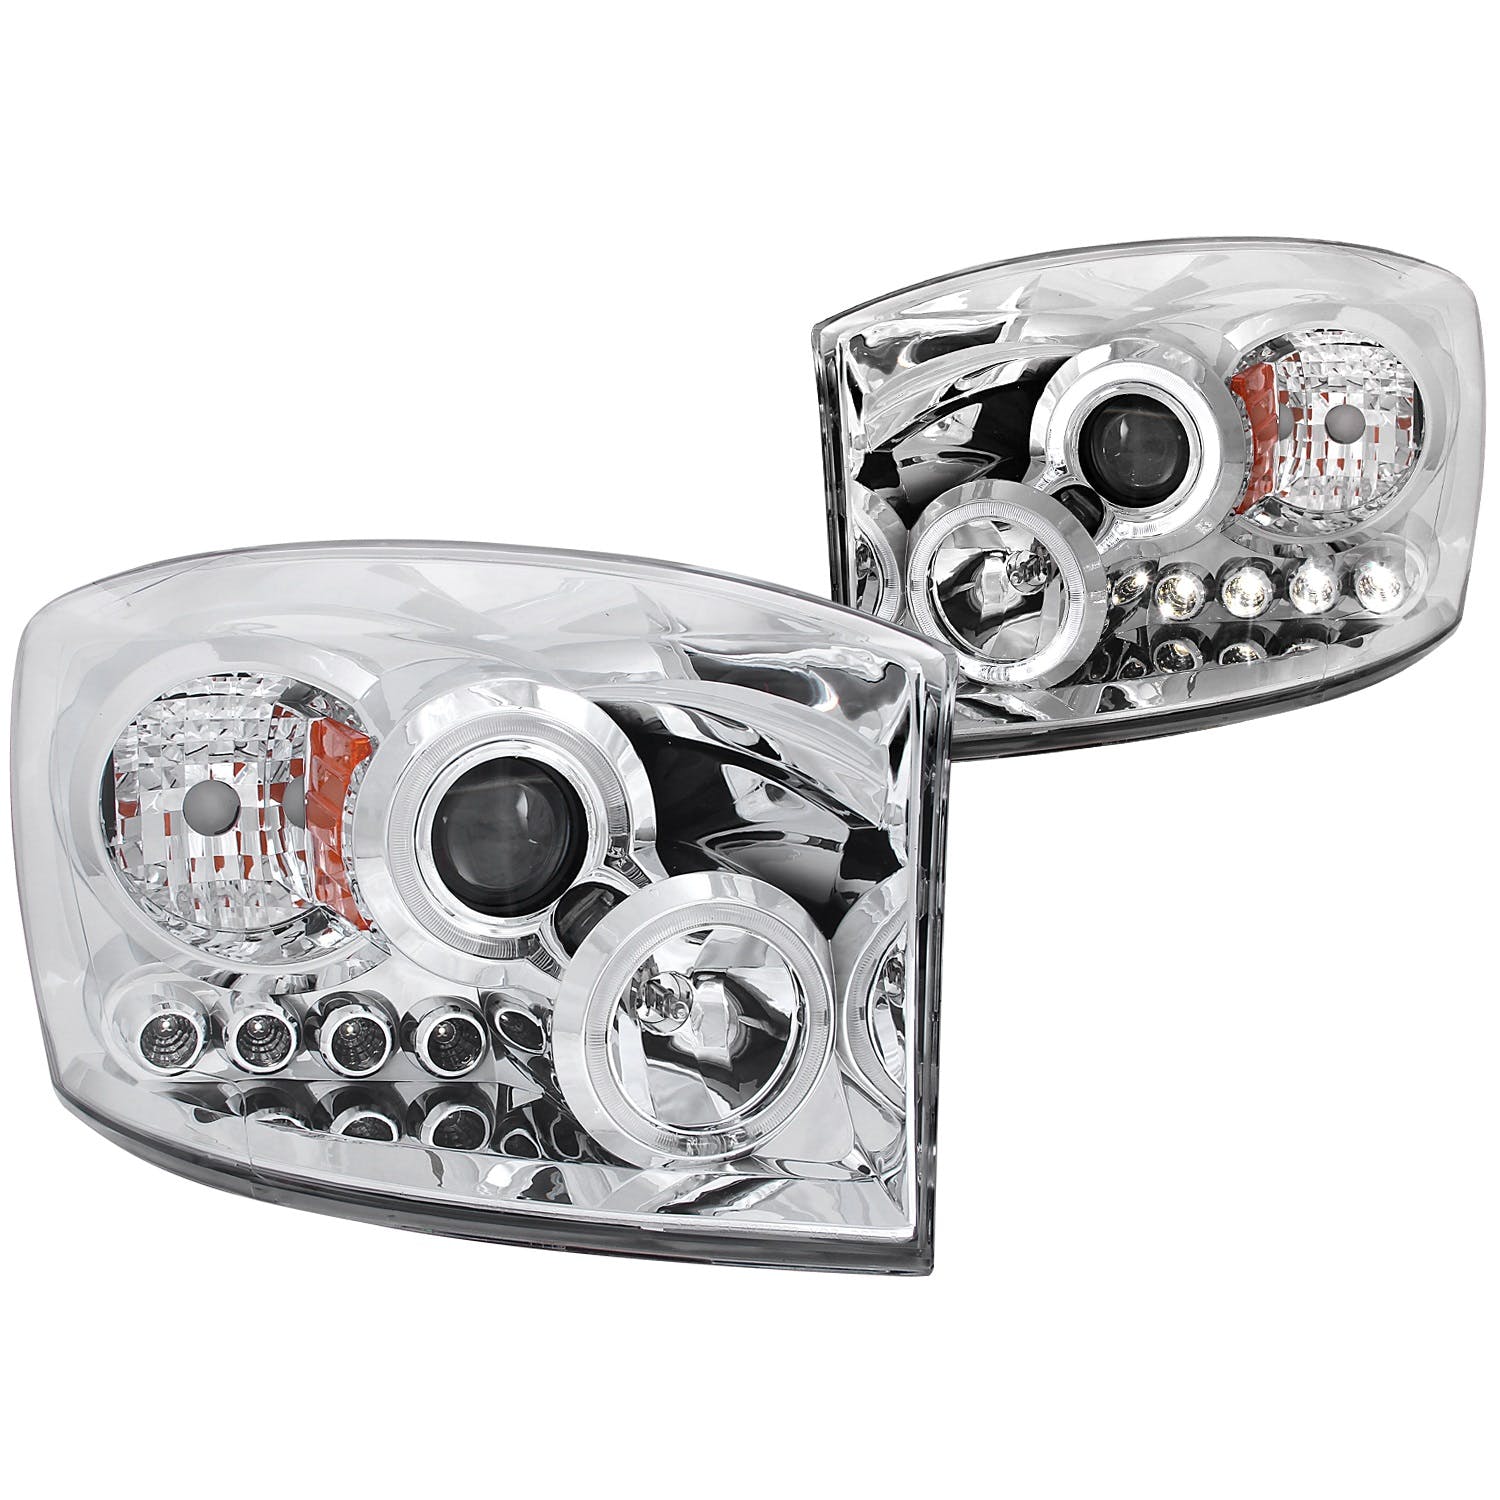 AnzoUSA 111210 Projector Headlights with Halo Chrome